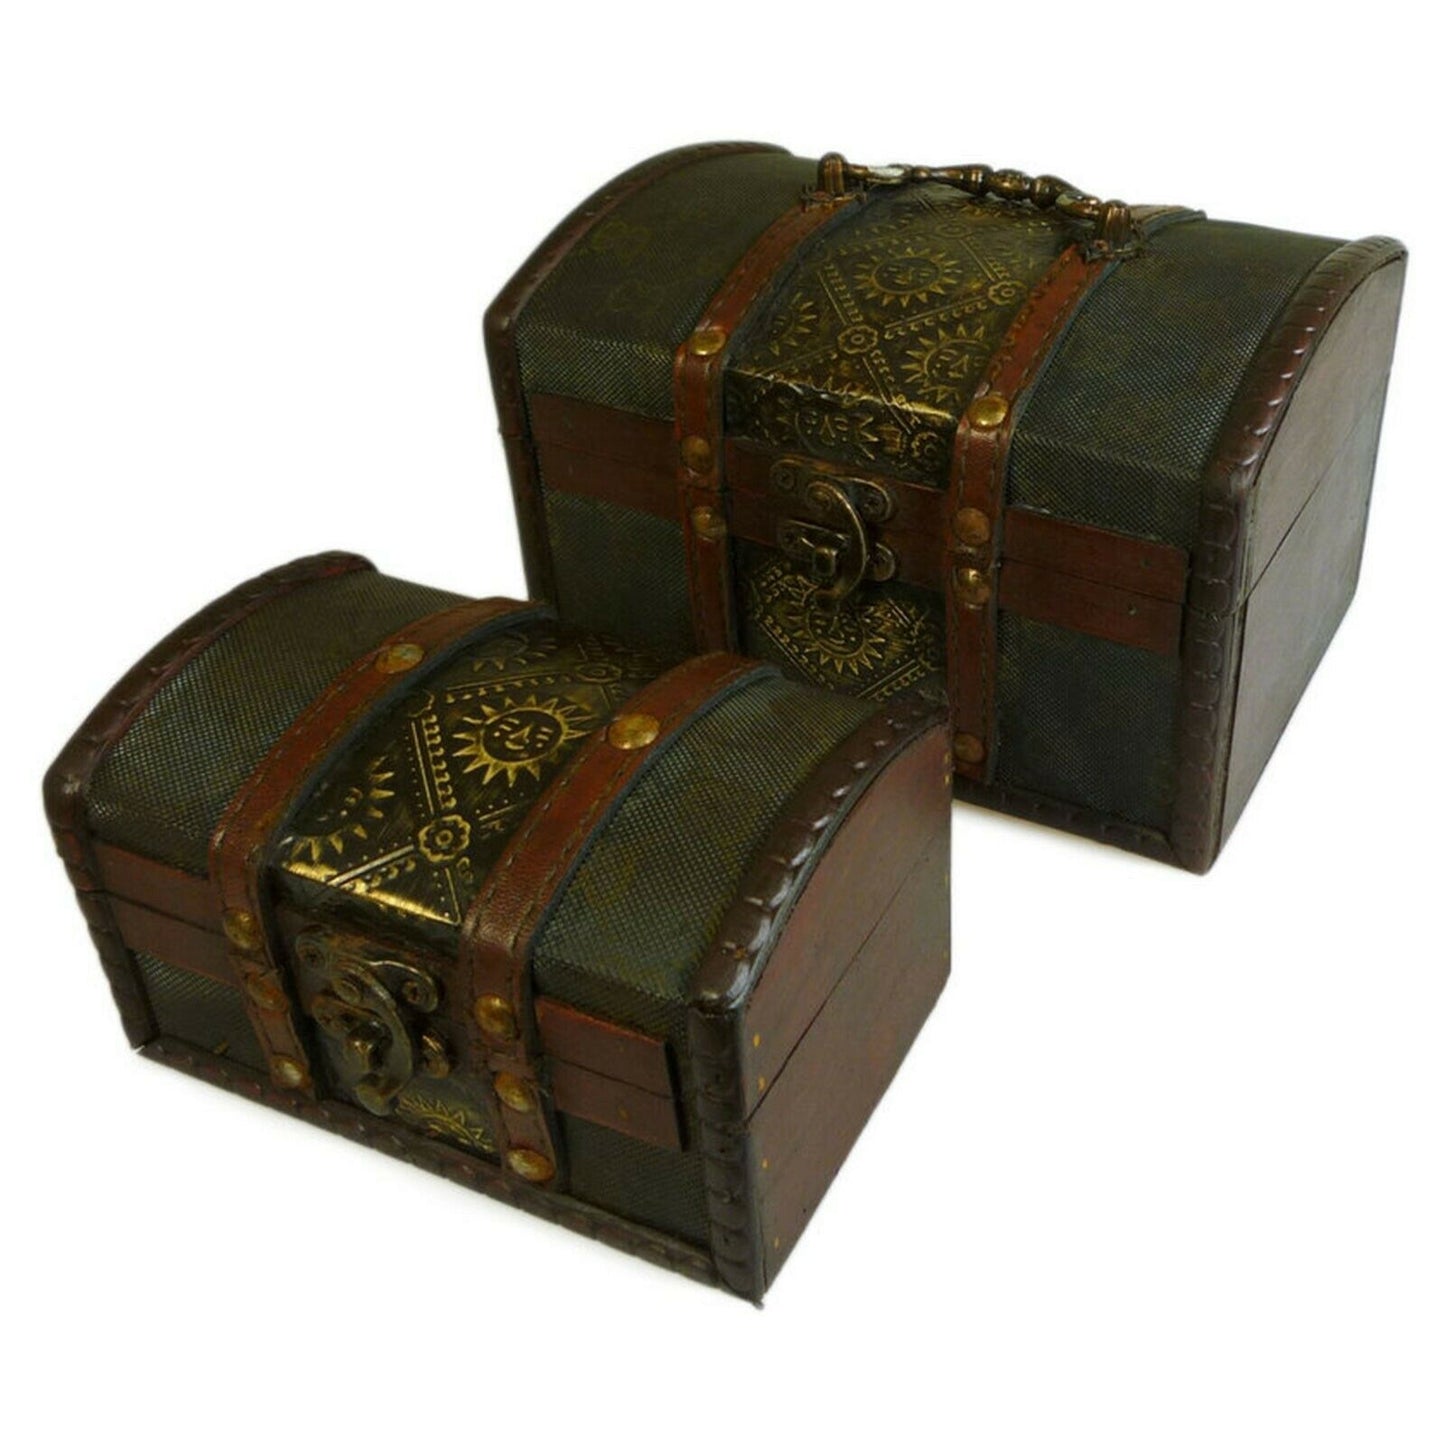 STEAMPUNK/VINTAGE Sets of 2 Colonial WOODEN HANDMADE Boxes - Metal Embossed none